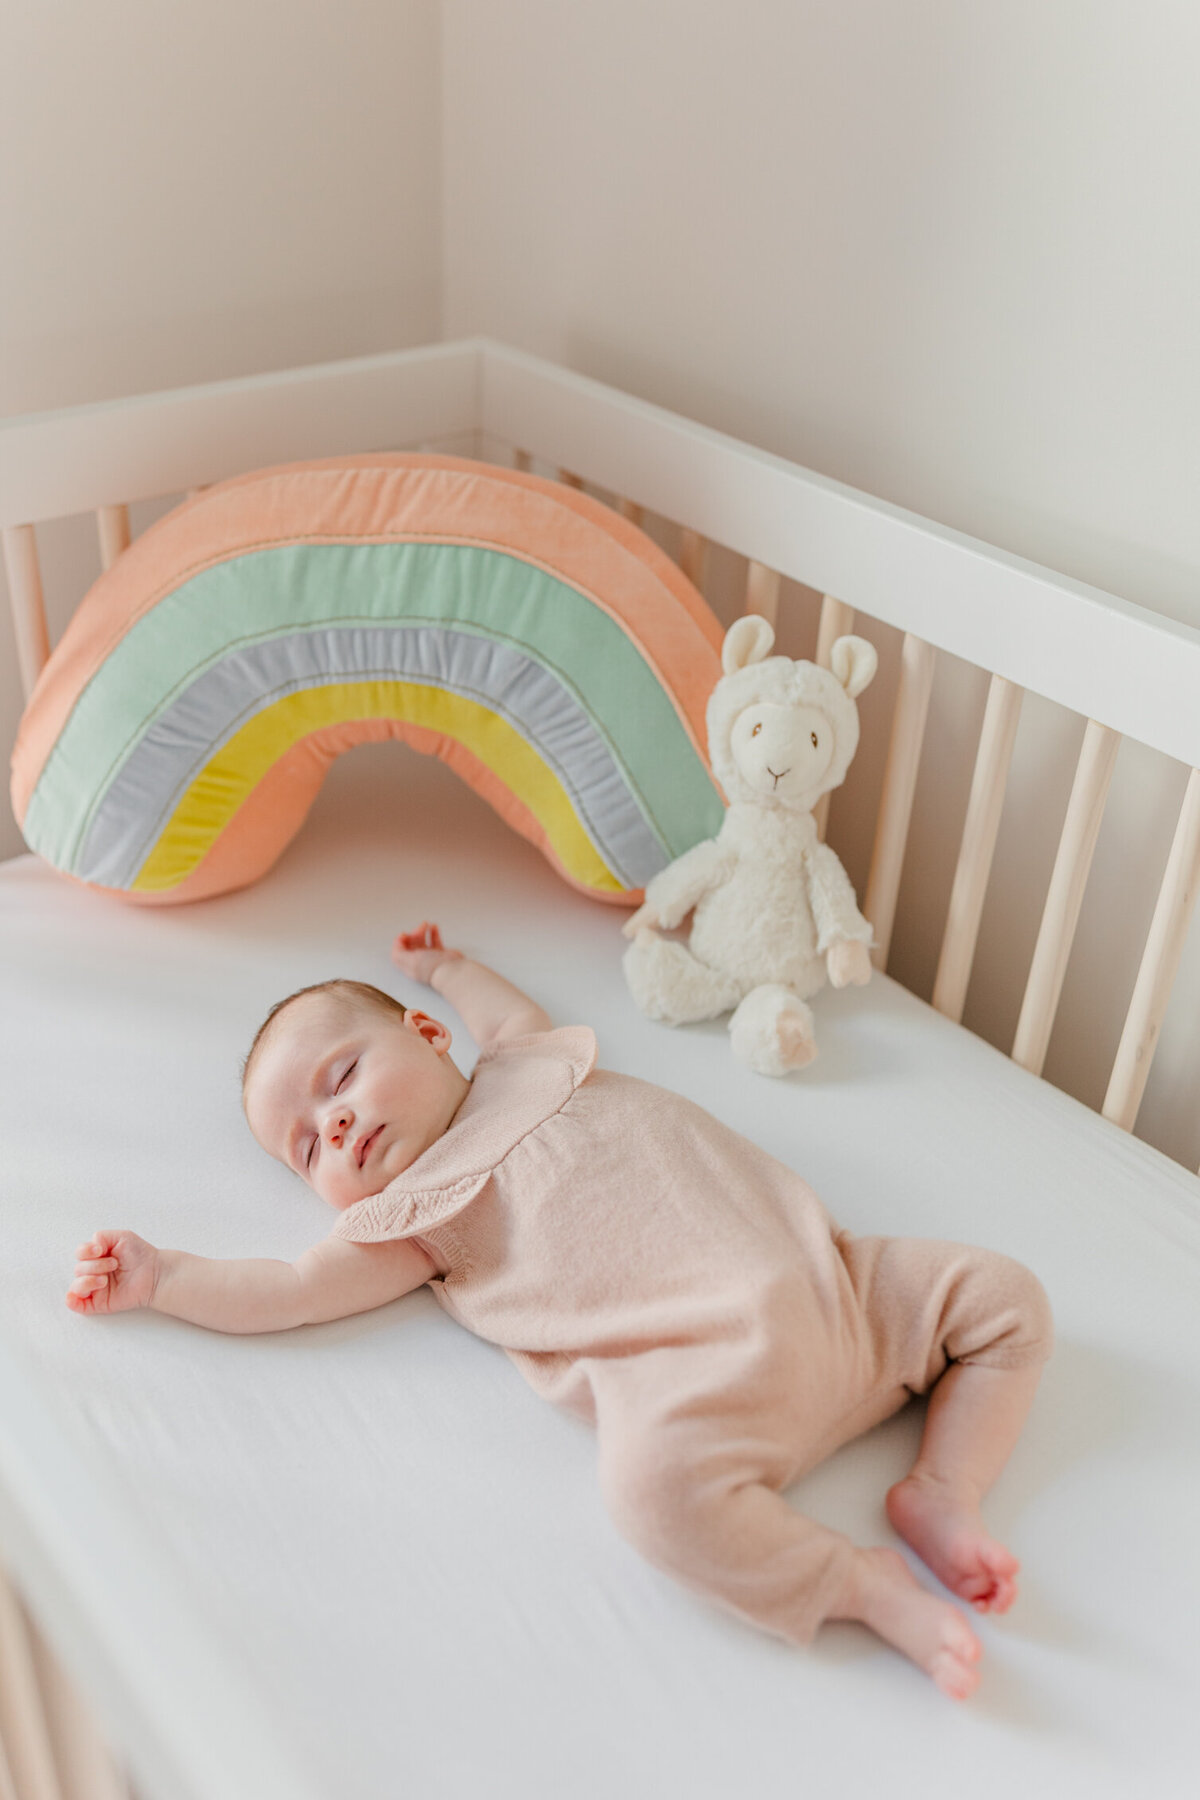 Boston newborn baby in soft pink outfit sleeping with her hands up by her head in a crib decorated with a rainbow and llama plushie